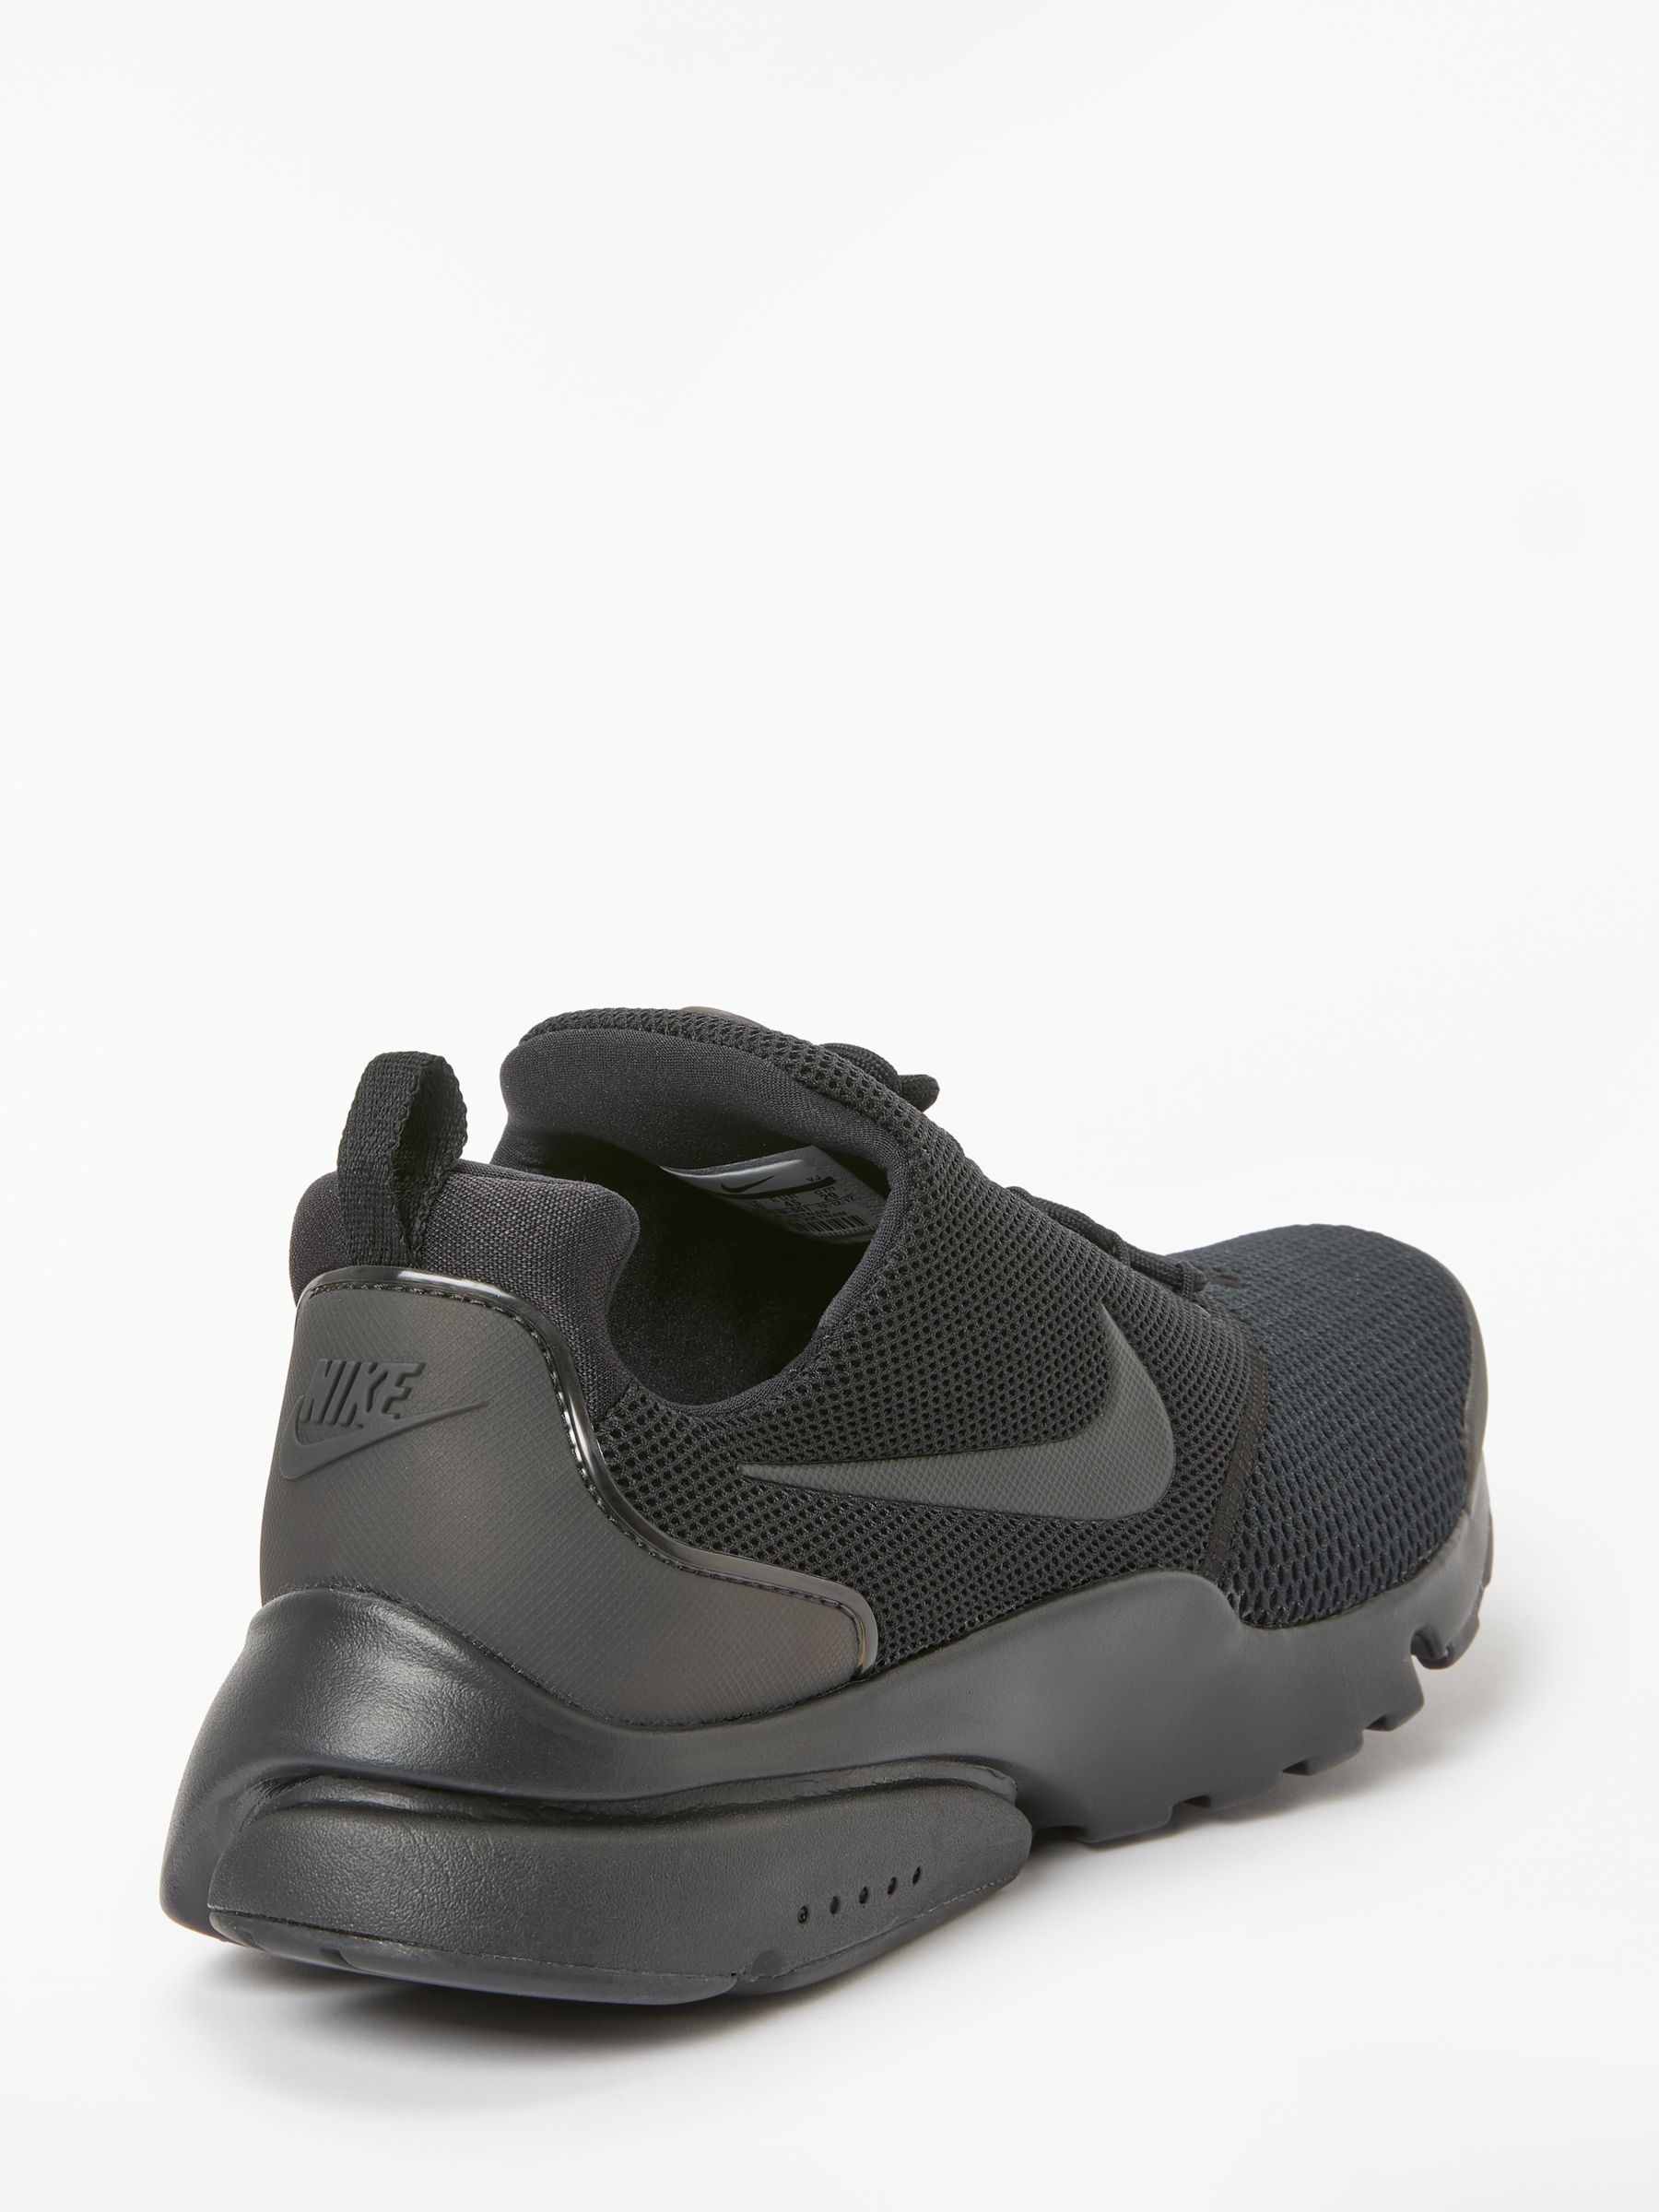 nike presto fly mens trainers